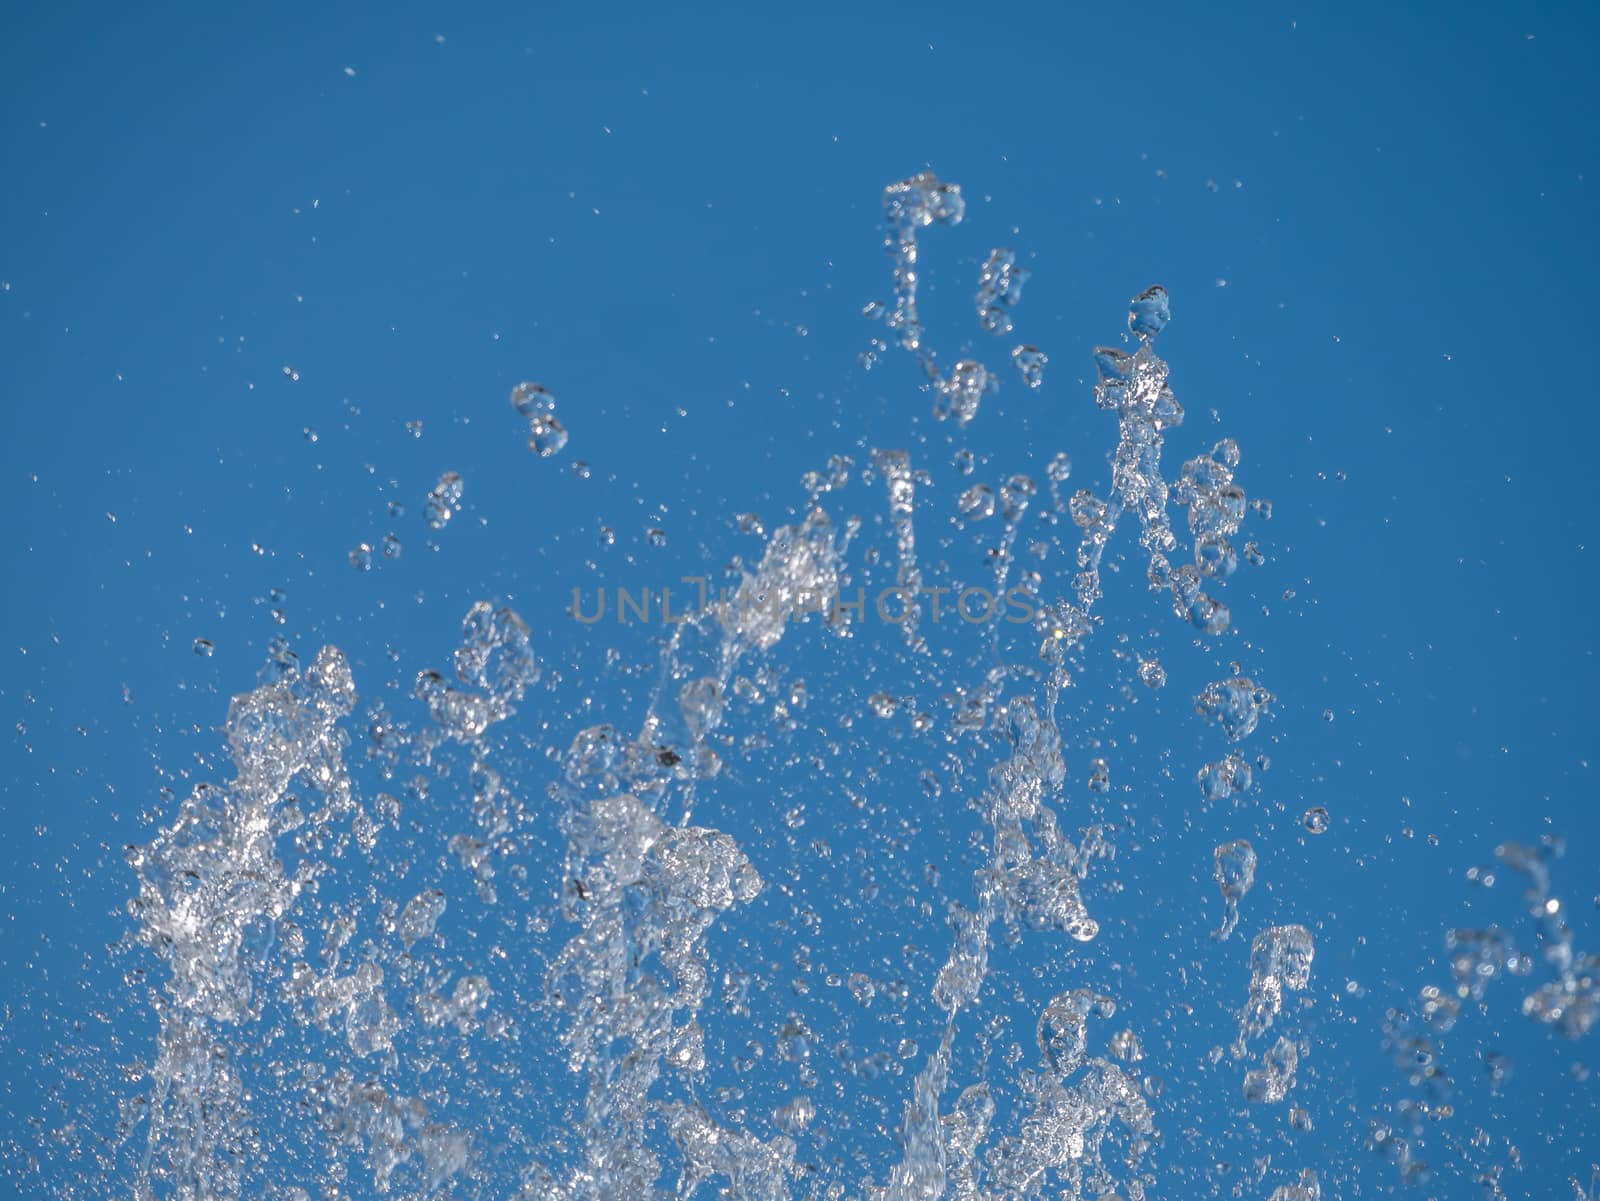 Water splash With blue background by nikky1972